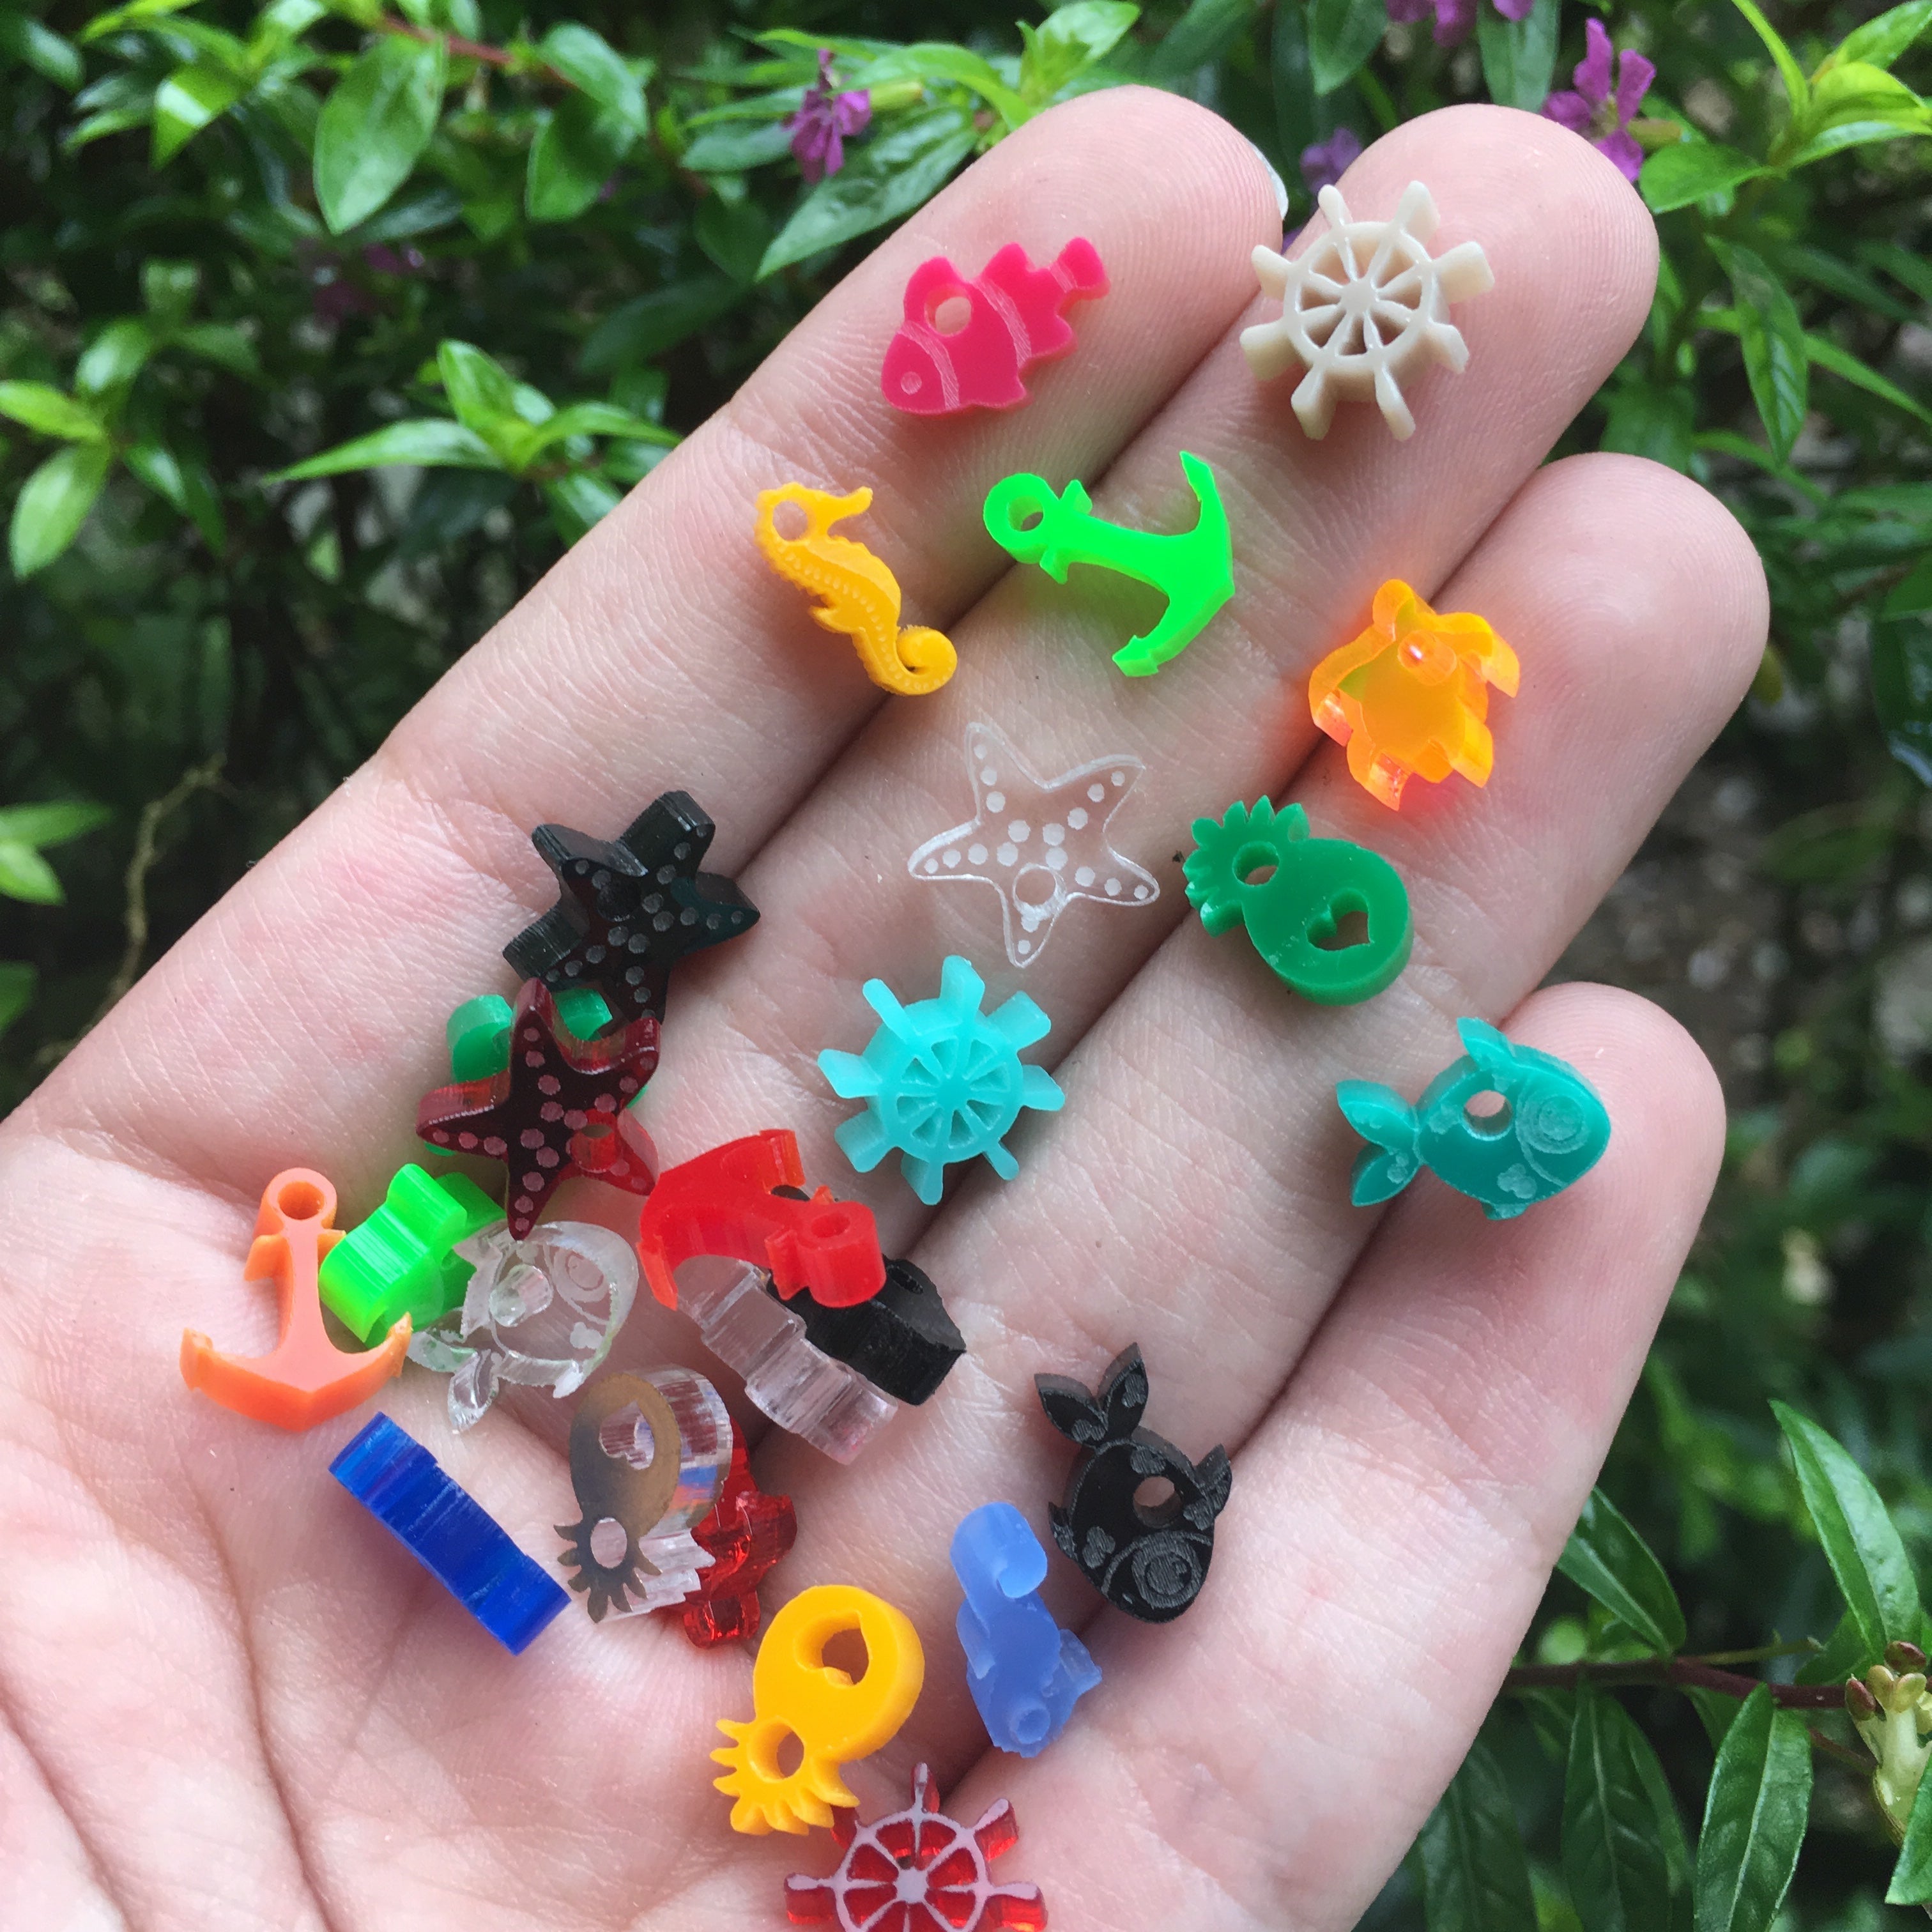 Mini Ocean Charms / 25 Pieces, 10mm